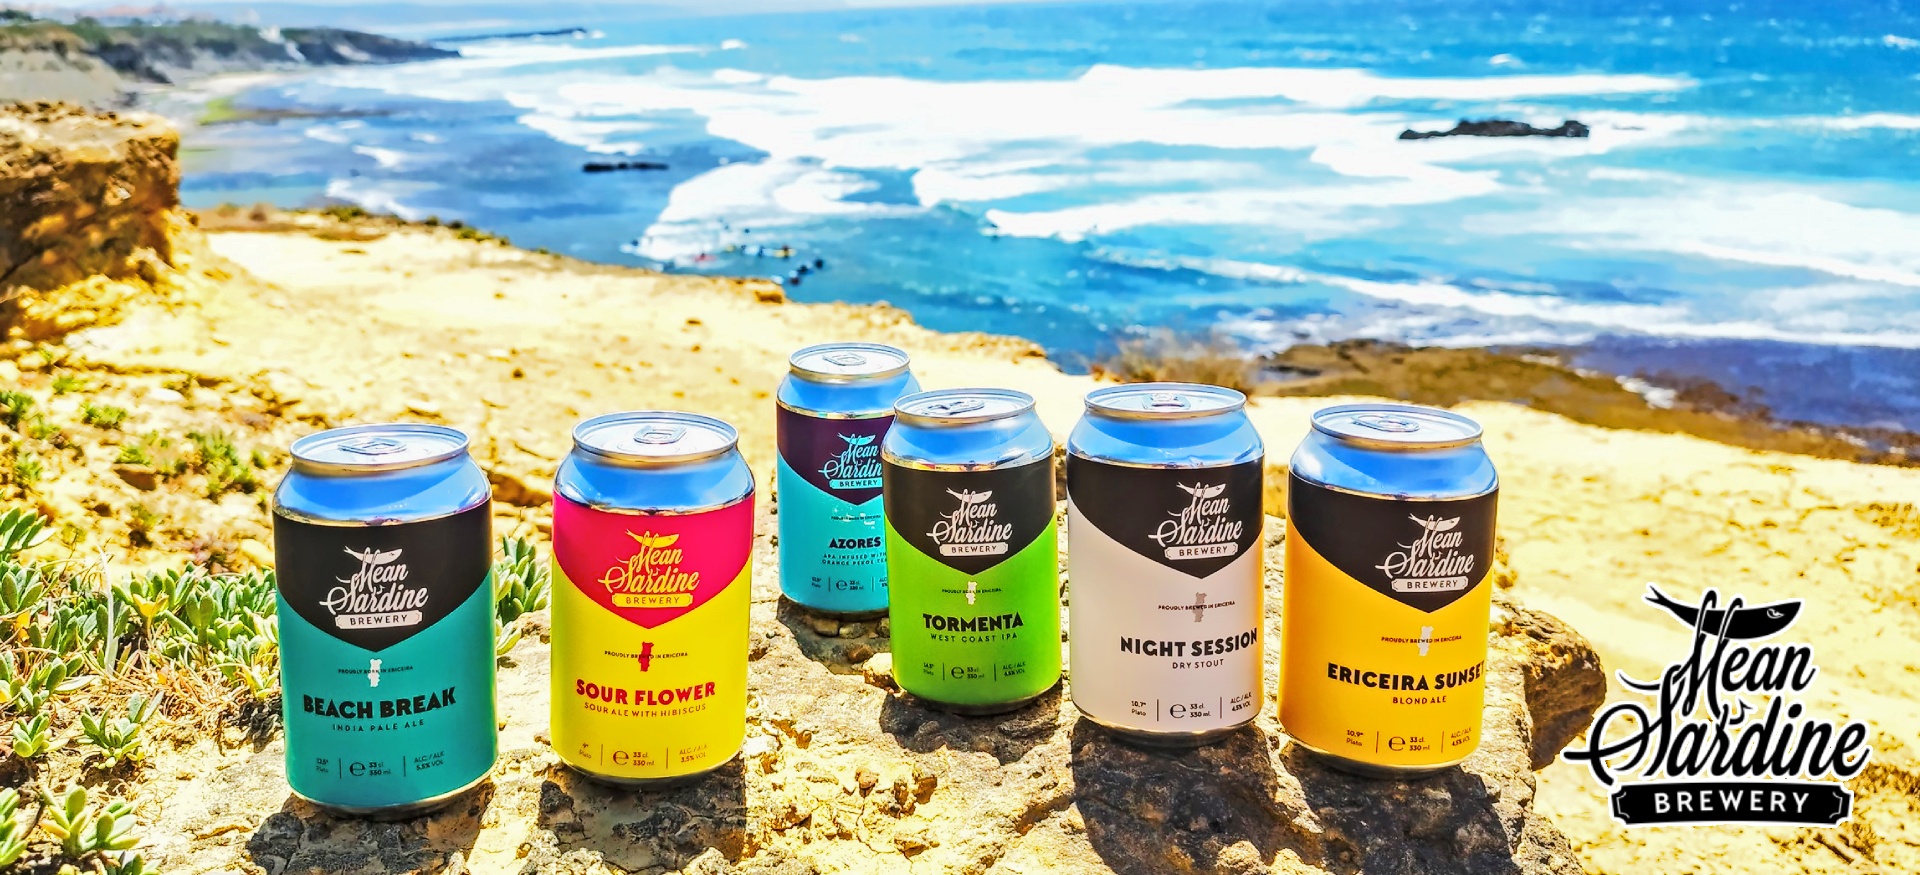 Mean Sardine craft beers on the coast | Mean Sardine brewery from Ericeira, Portugal | Craft Beer Nomads